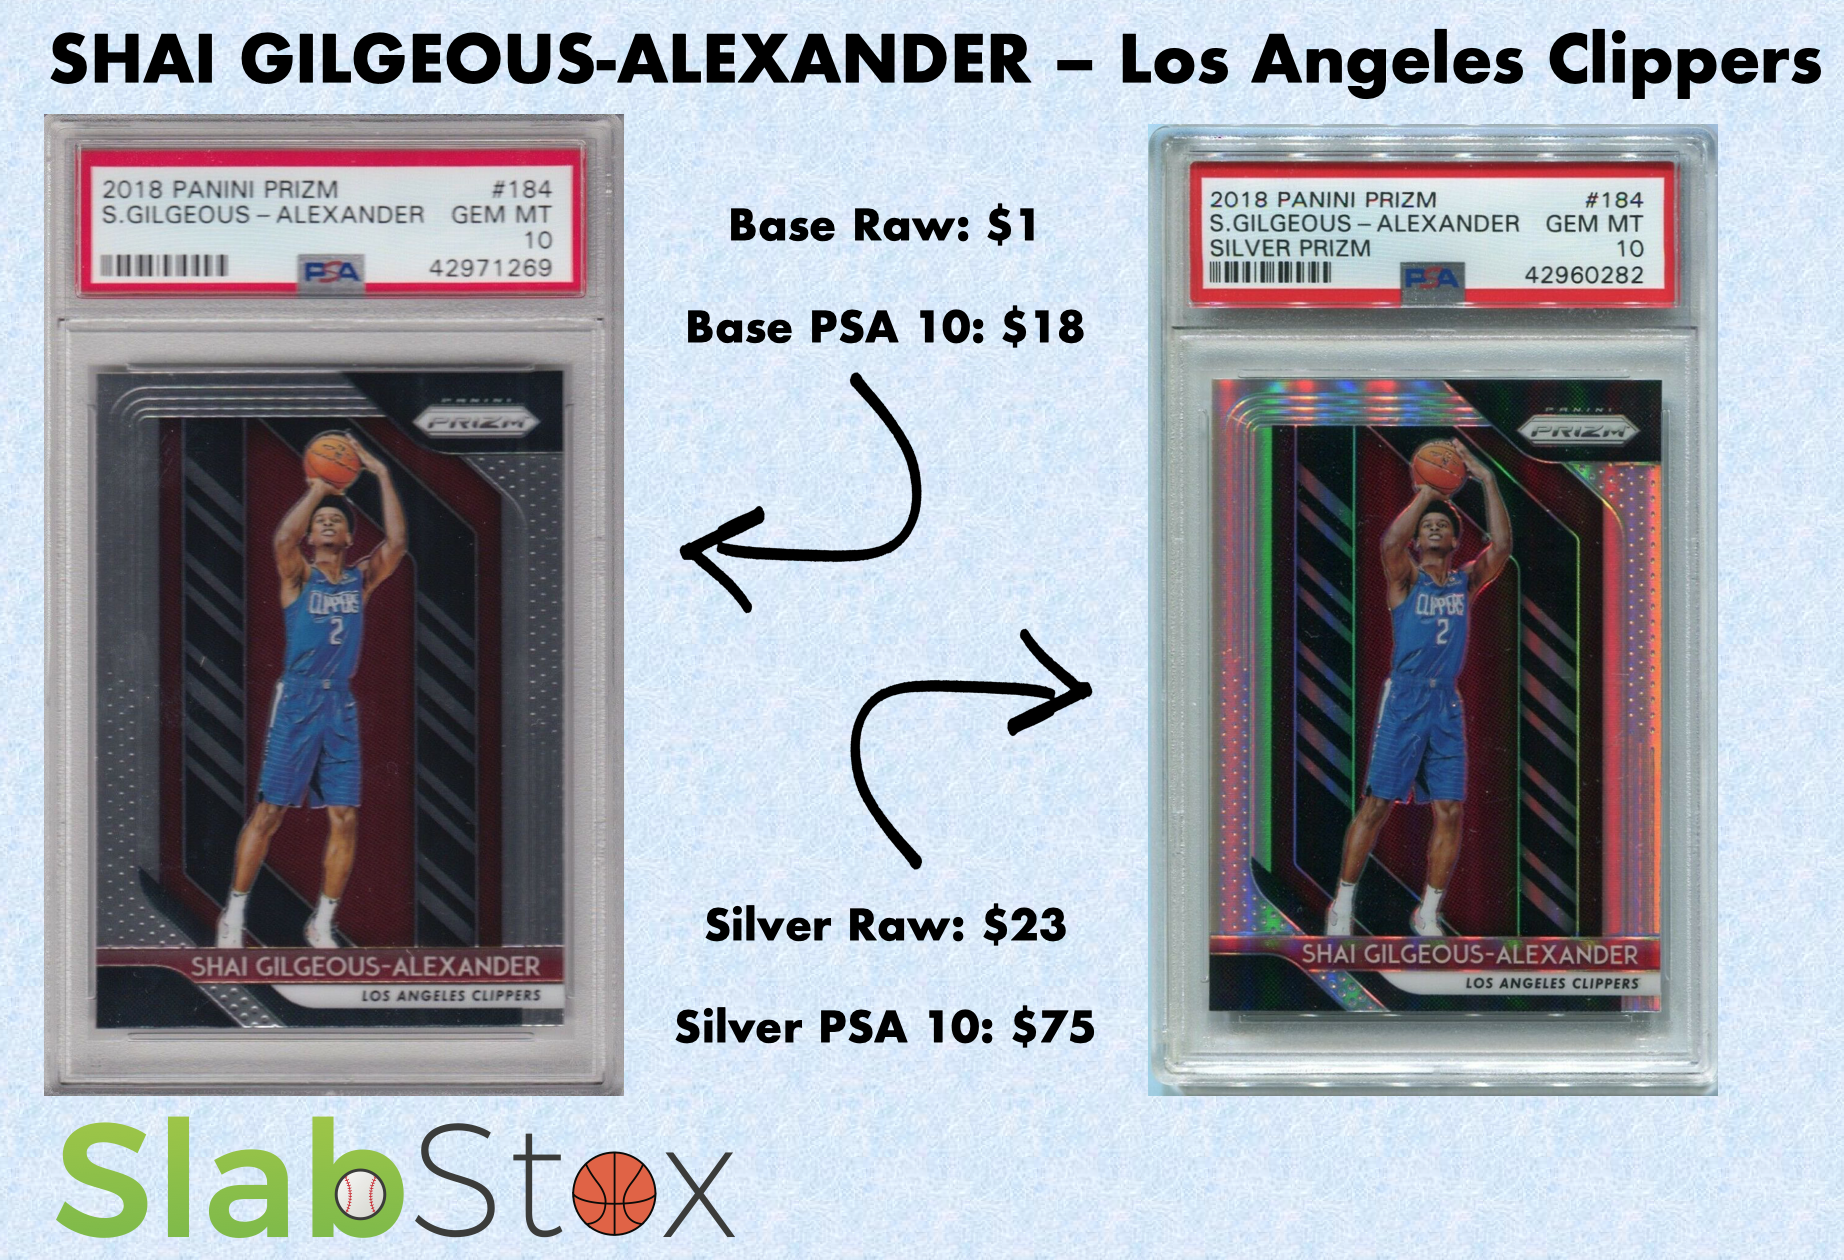 Graphic image with sports cards for Shai Gilgeous-Alexander of the Los Angeles Clippers with the SlabStox logo underneath